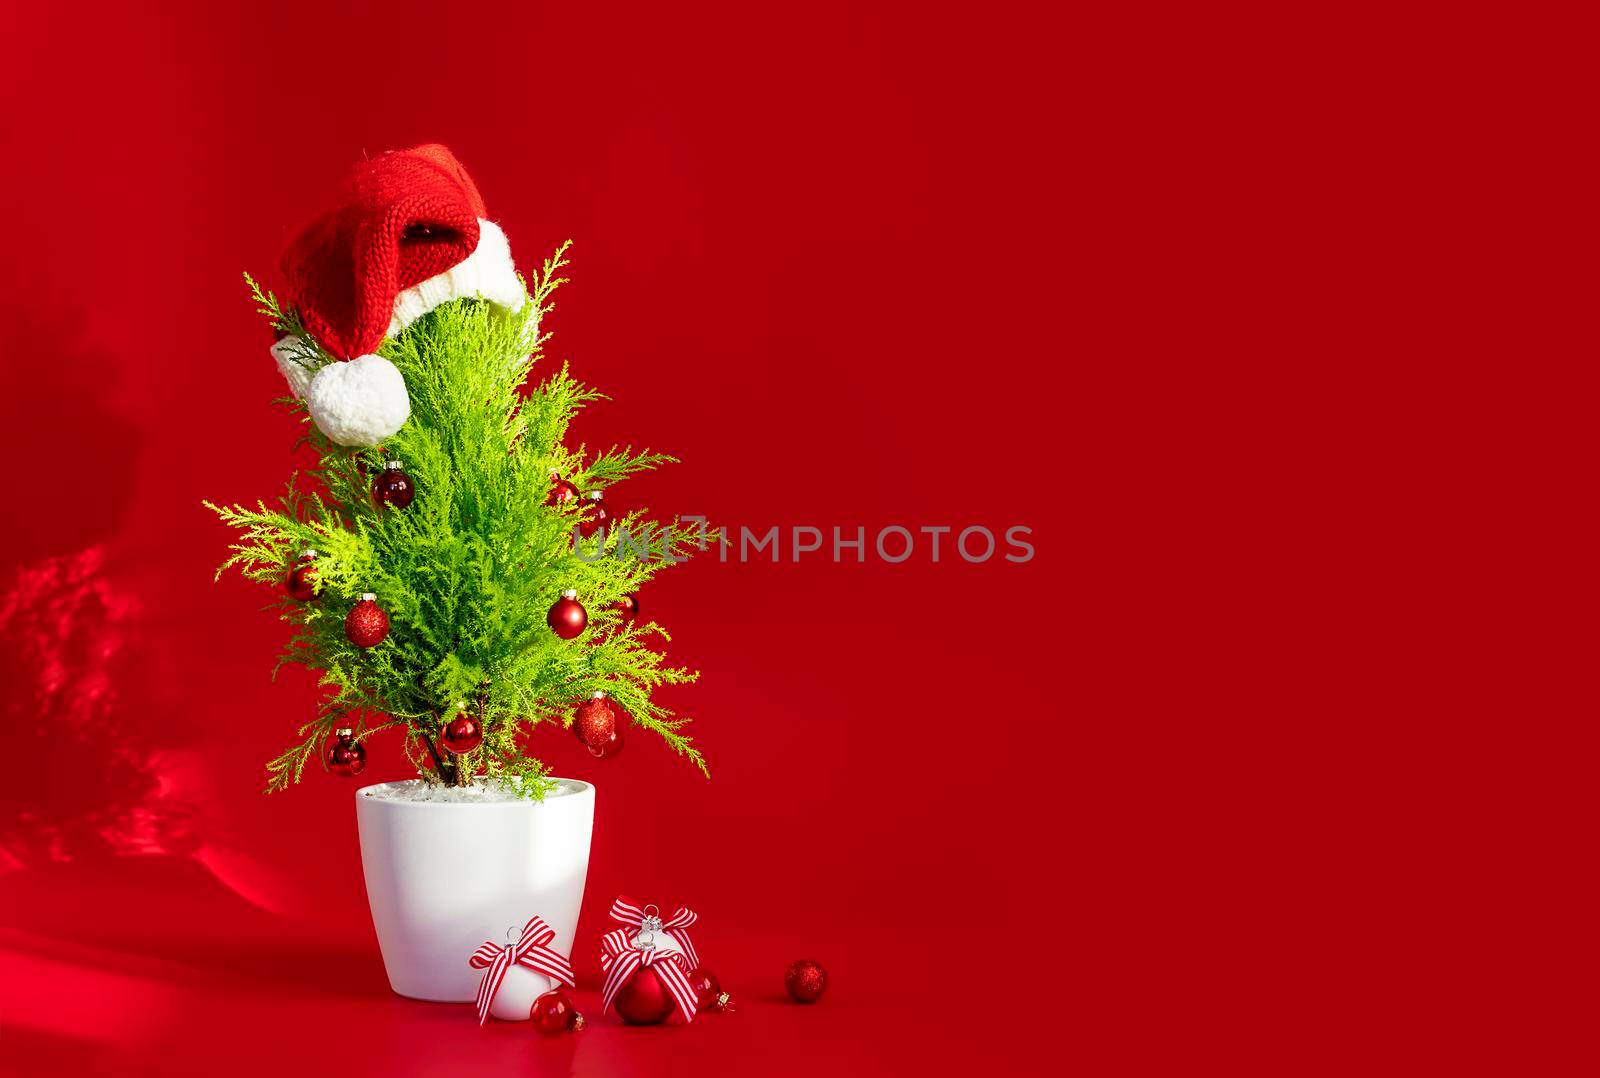 Big New Year banner on a red background. Small Christmas tree and decorations with copy paste for your product or text. new year banner concept, sale, new products and services